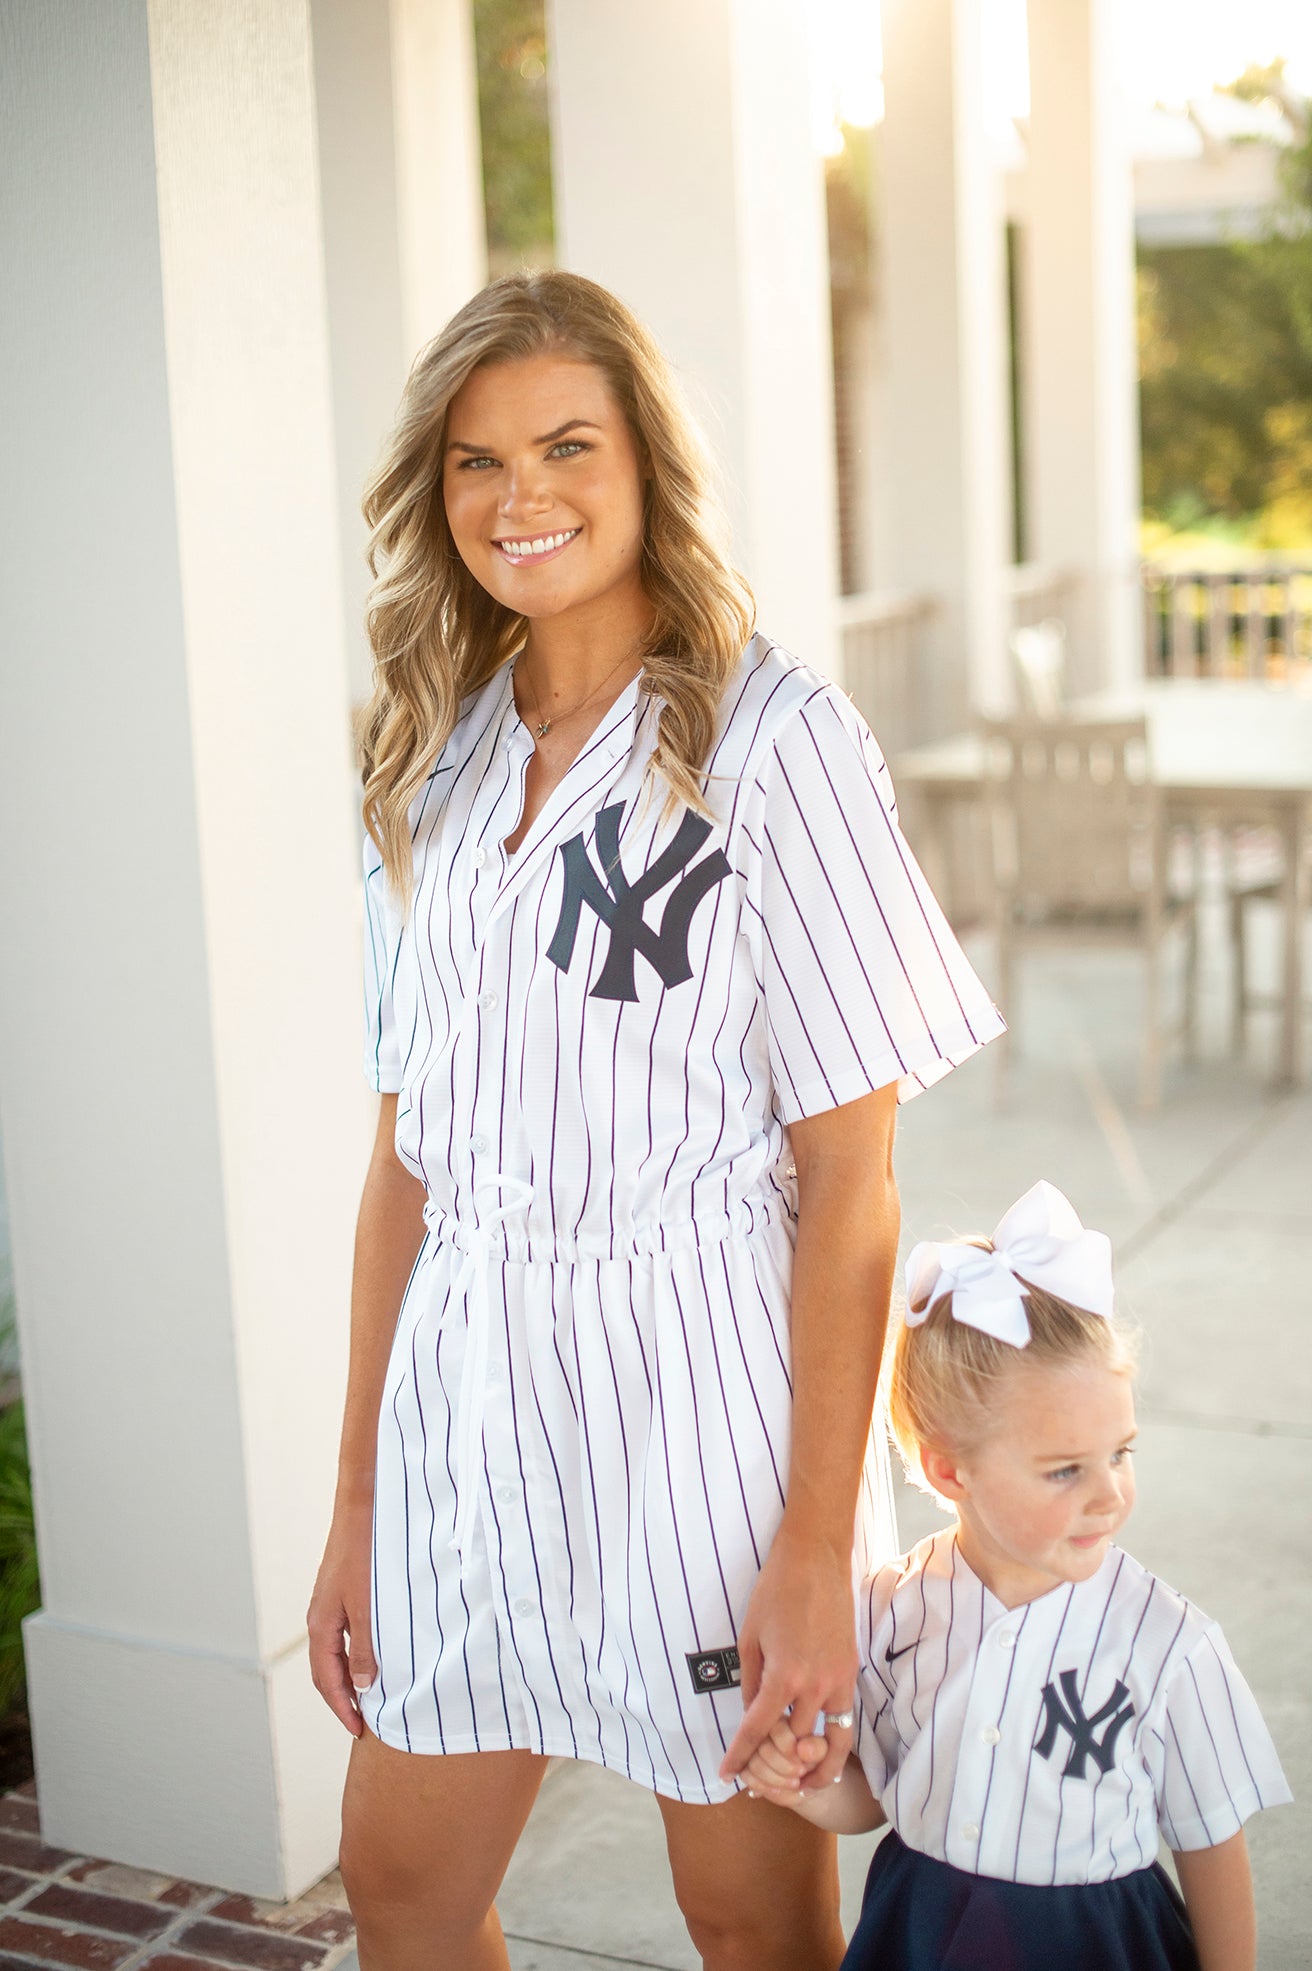 yankees womens clothes